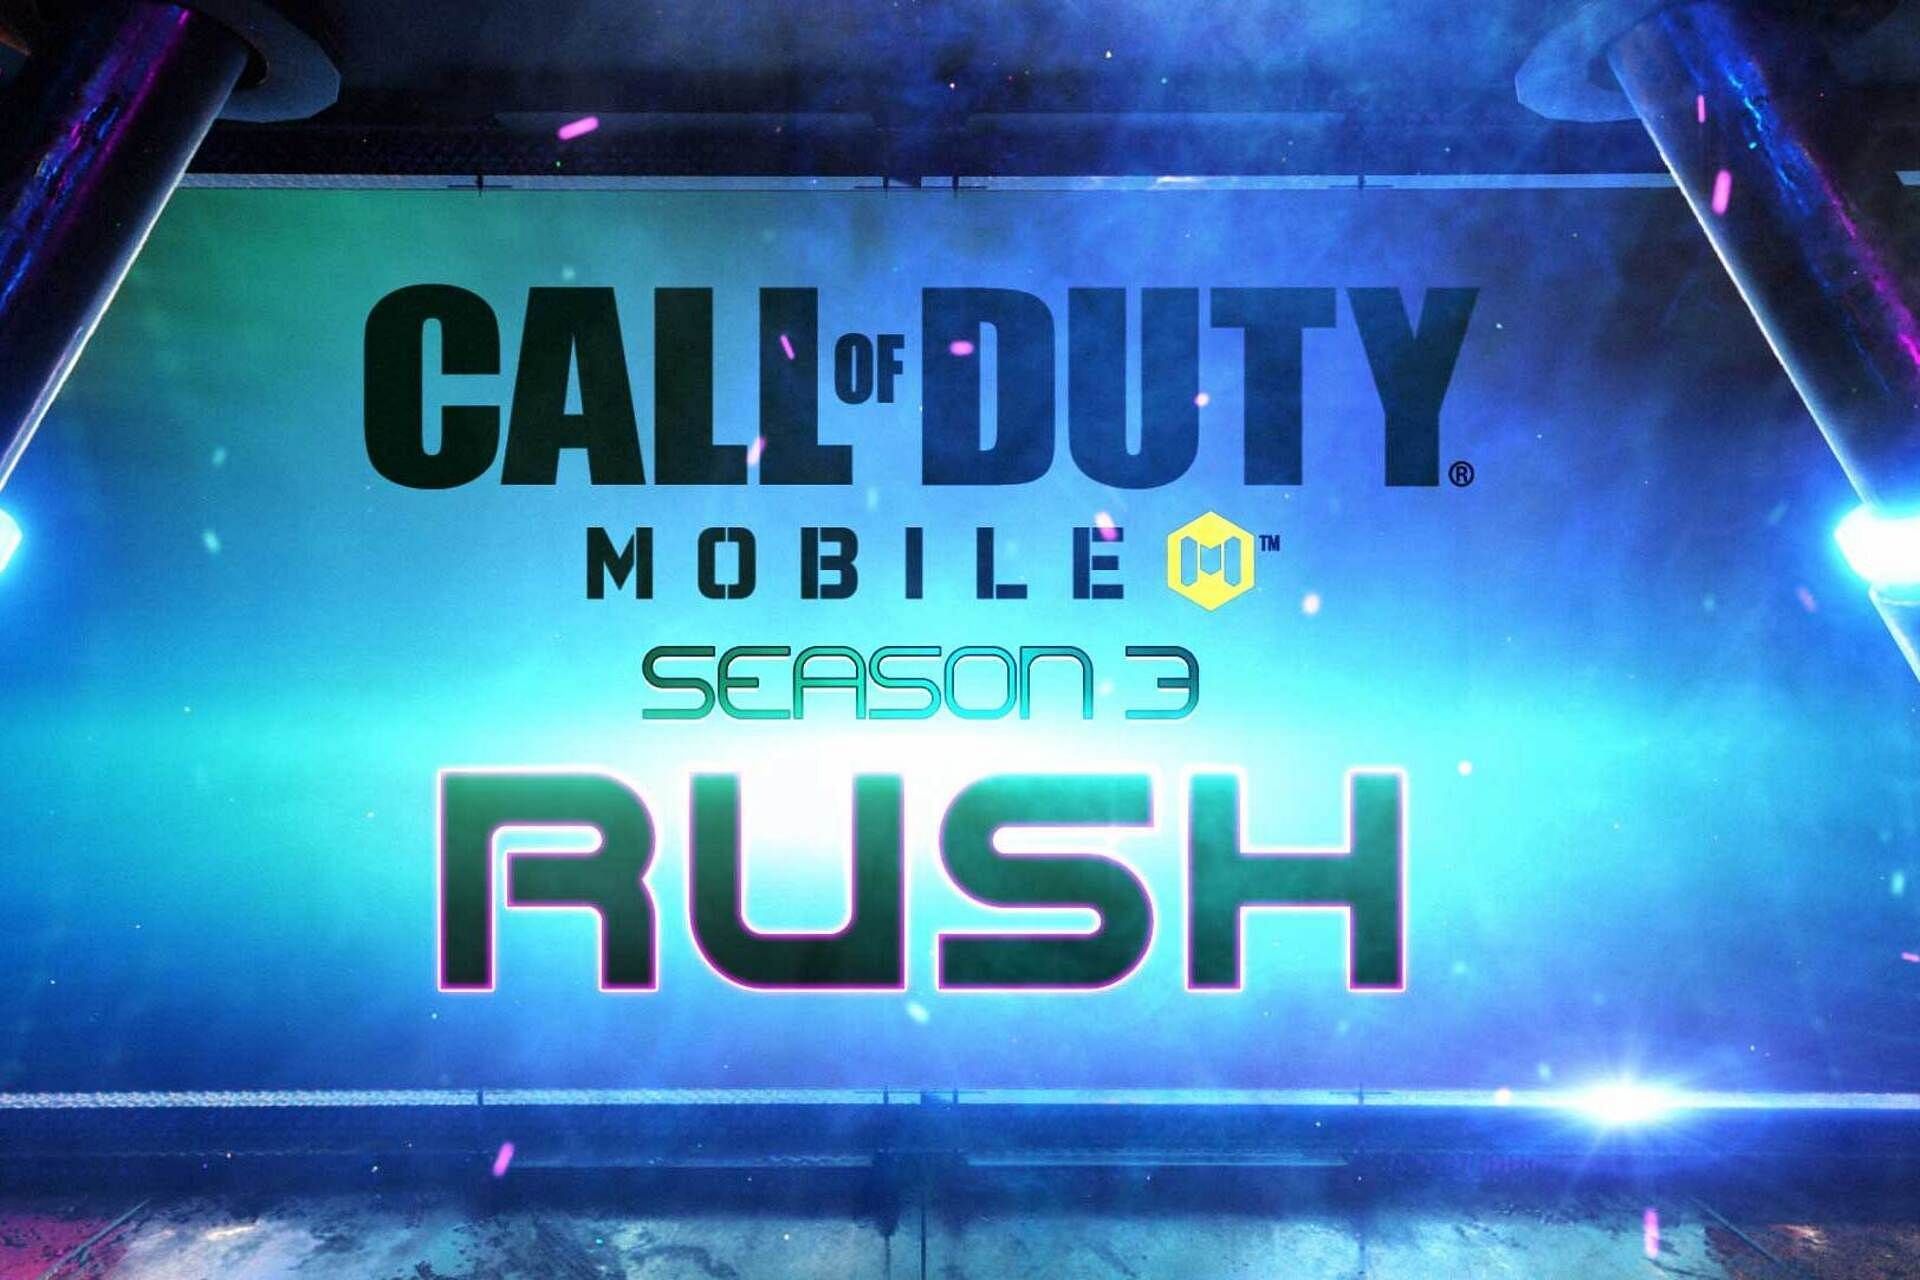 Call of Duty Mobile Season 3: Rush is arriving next week (Image via Activision)